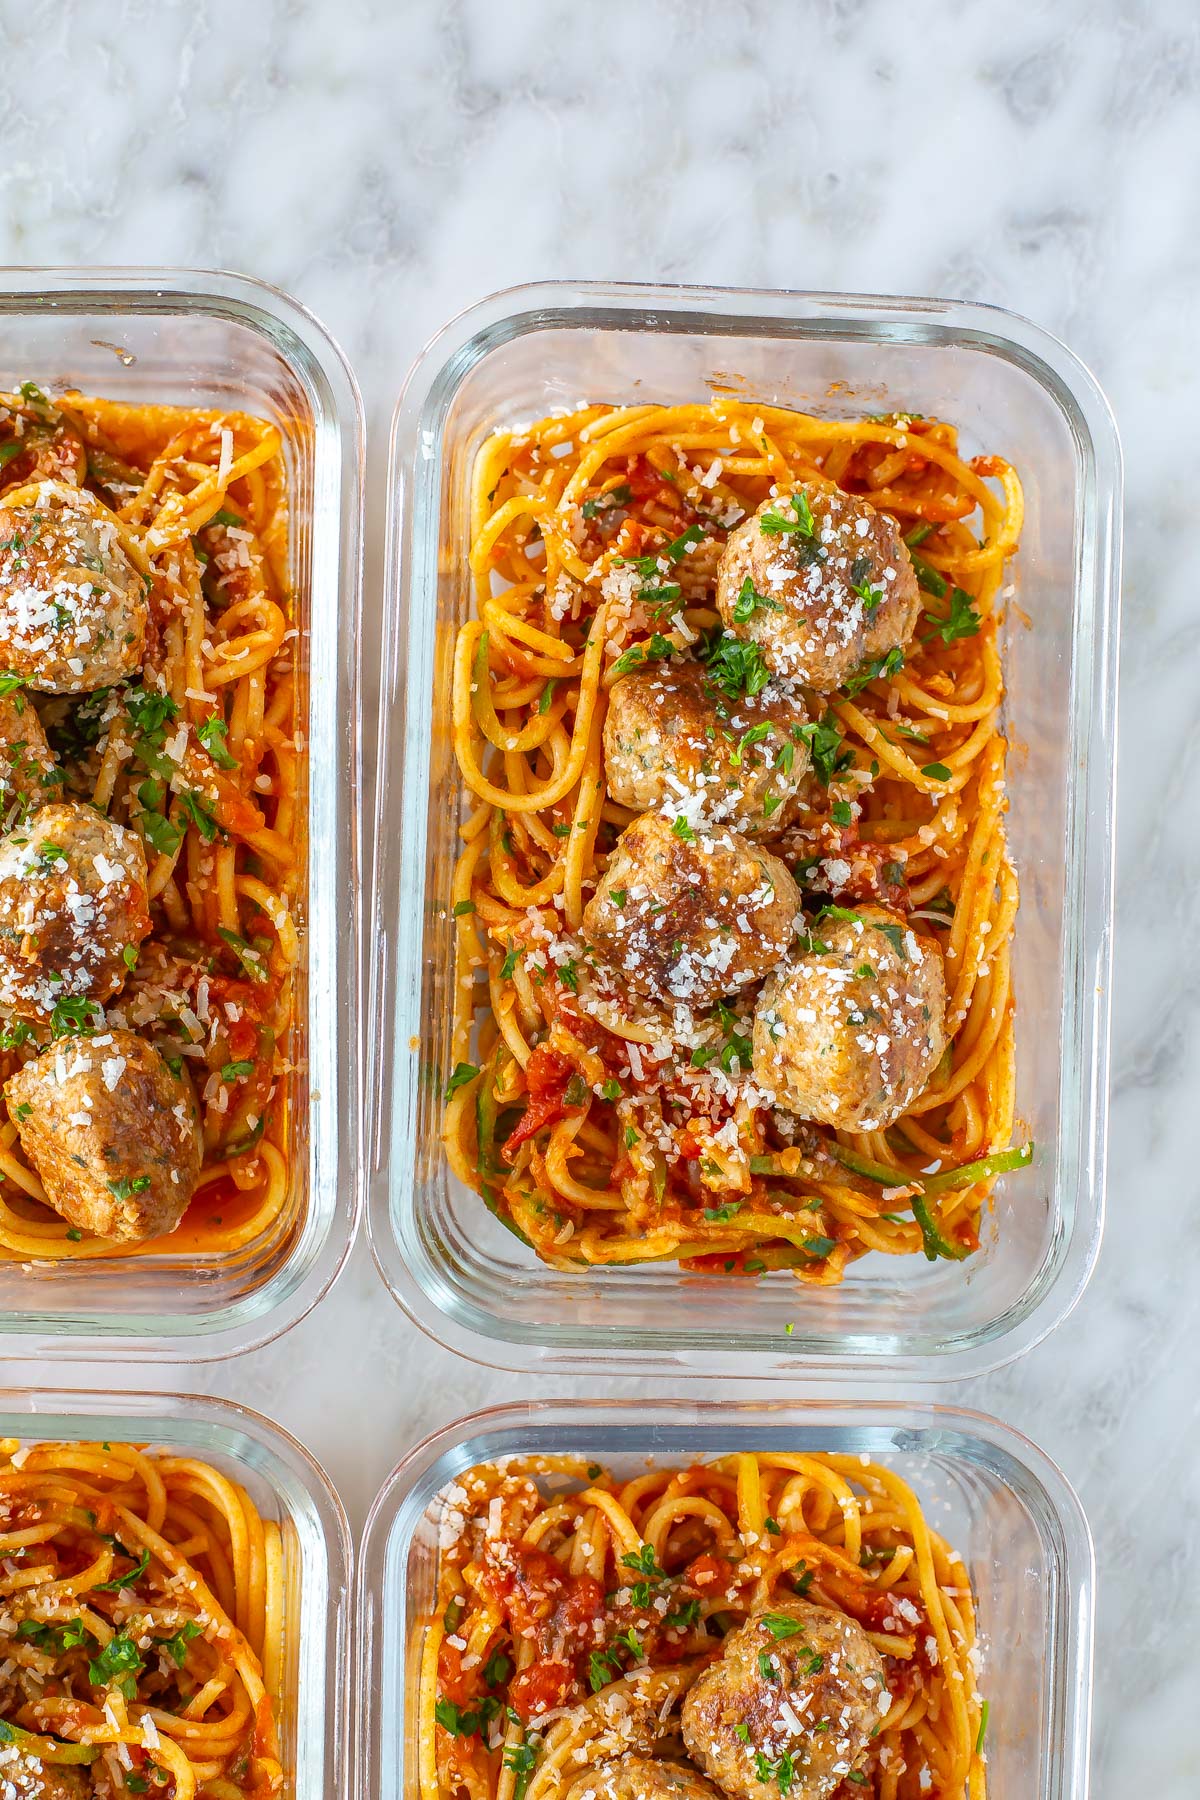 A close-up of baked turkey meatballs in a meal prep container with pasta and zucchini noodles.